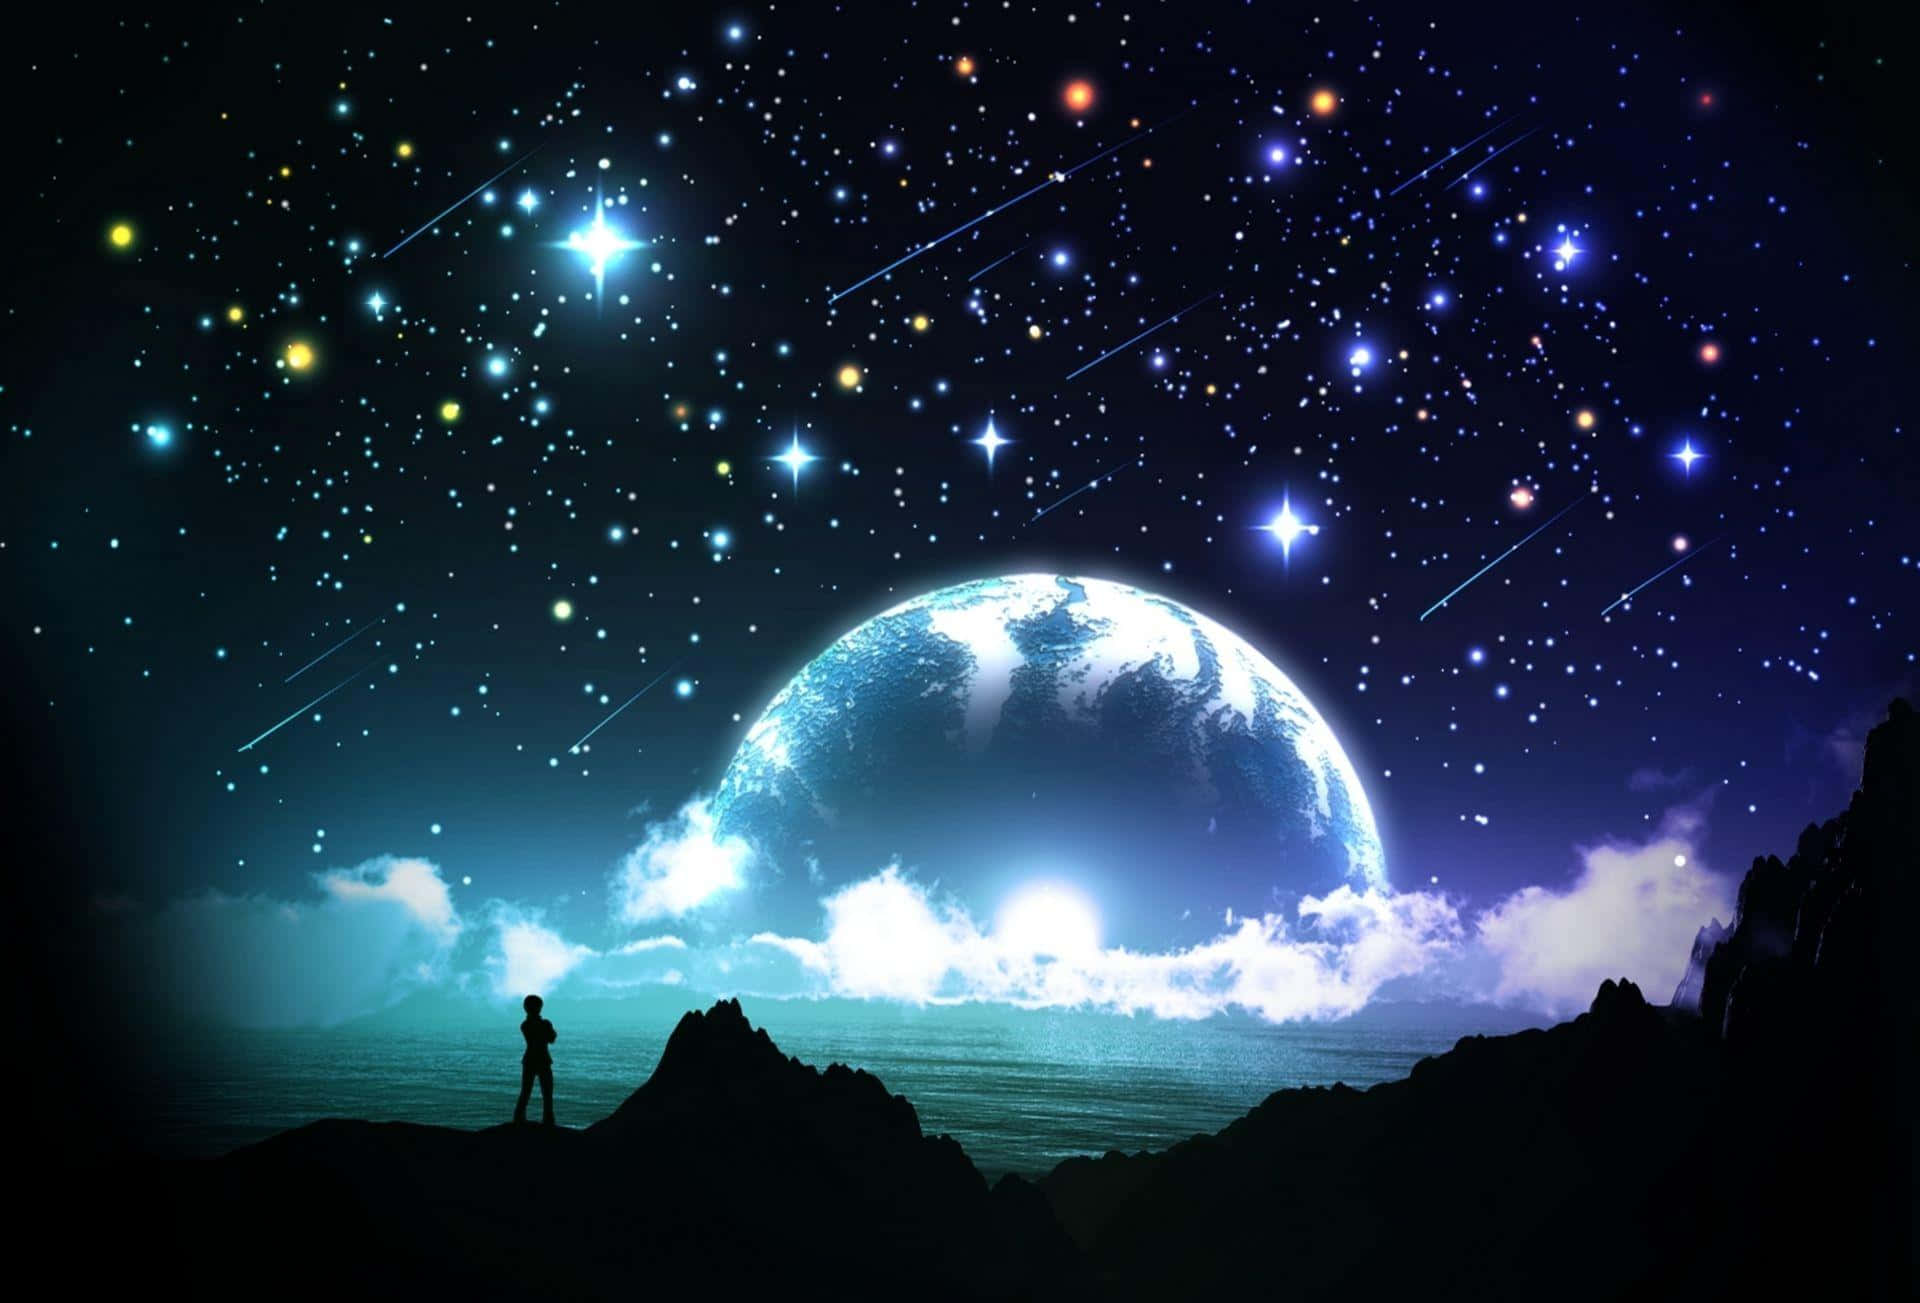 Artwork Of Magical Night Sky Overlooking Earth